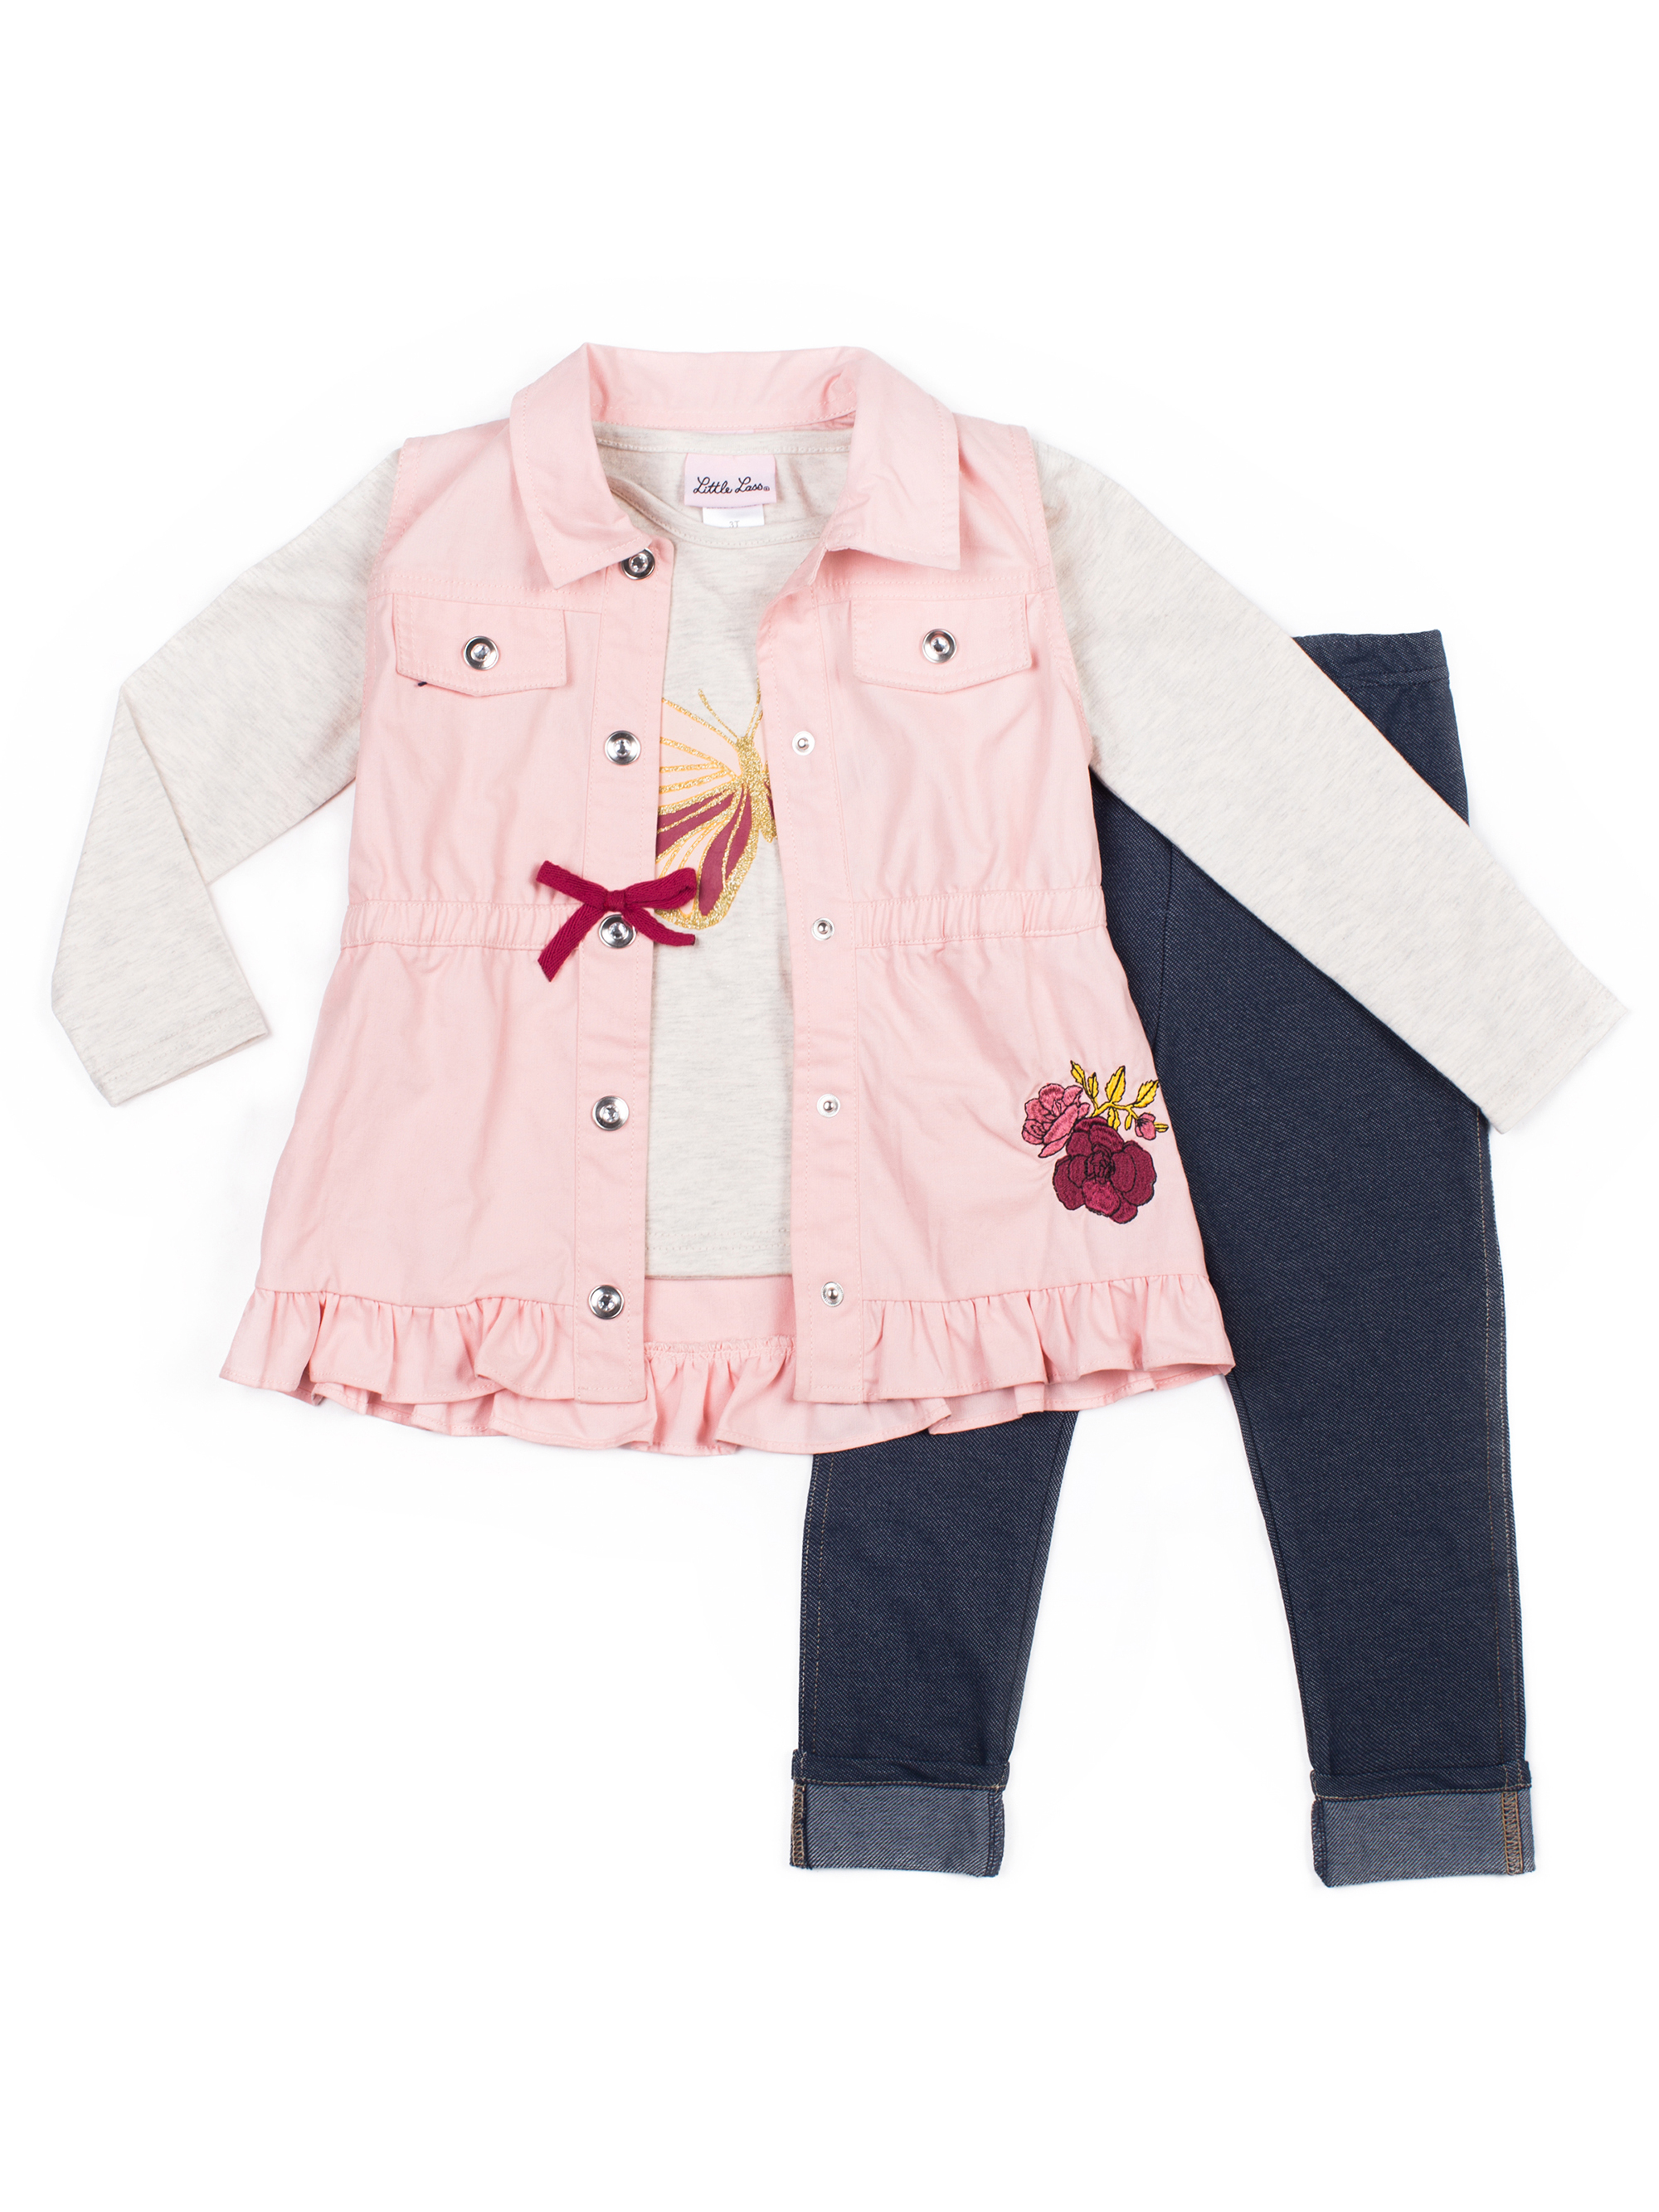 Buy Little Lass Vest, Fashion Top And Legging, 3-Piece Outfit Set Little  Girls Online at Lowest Price in India. 853882426